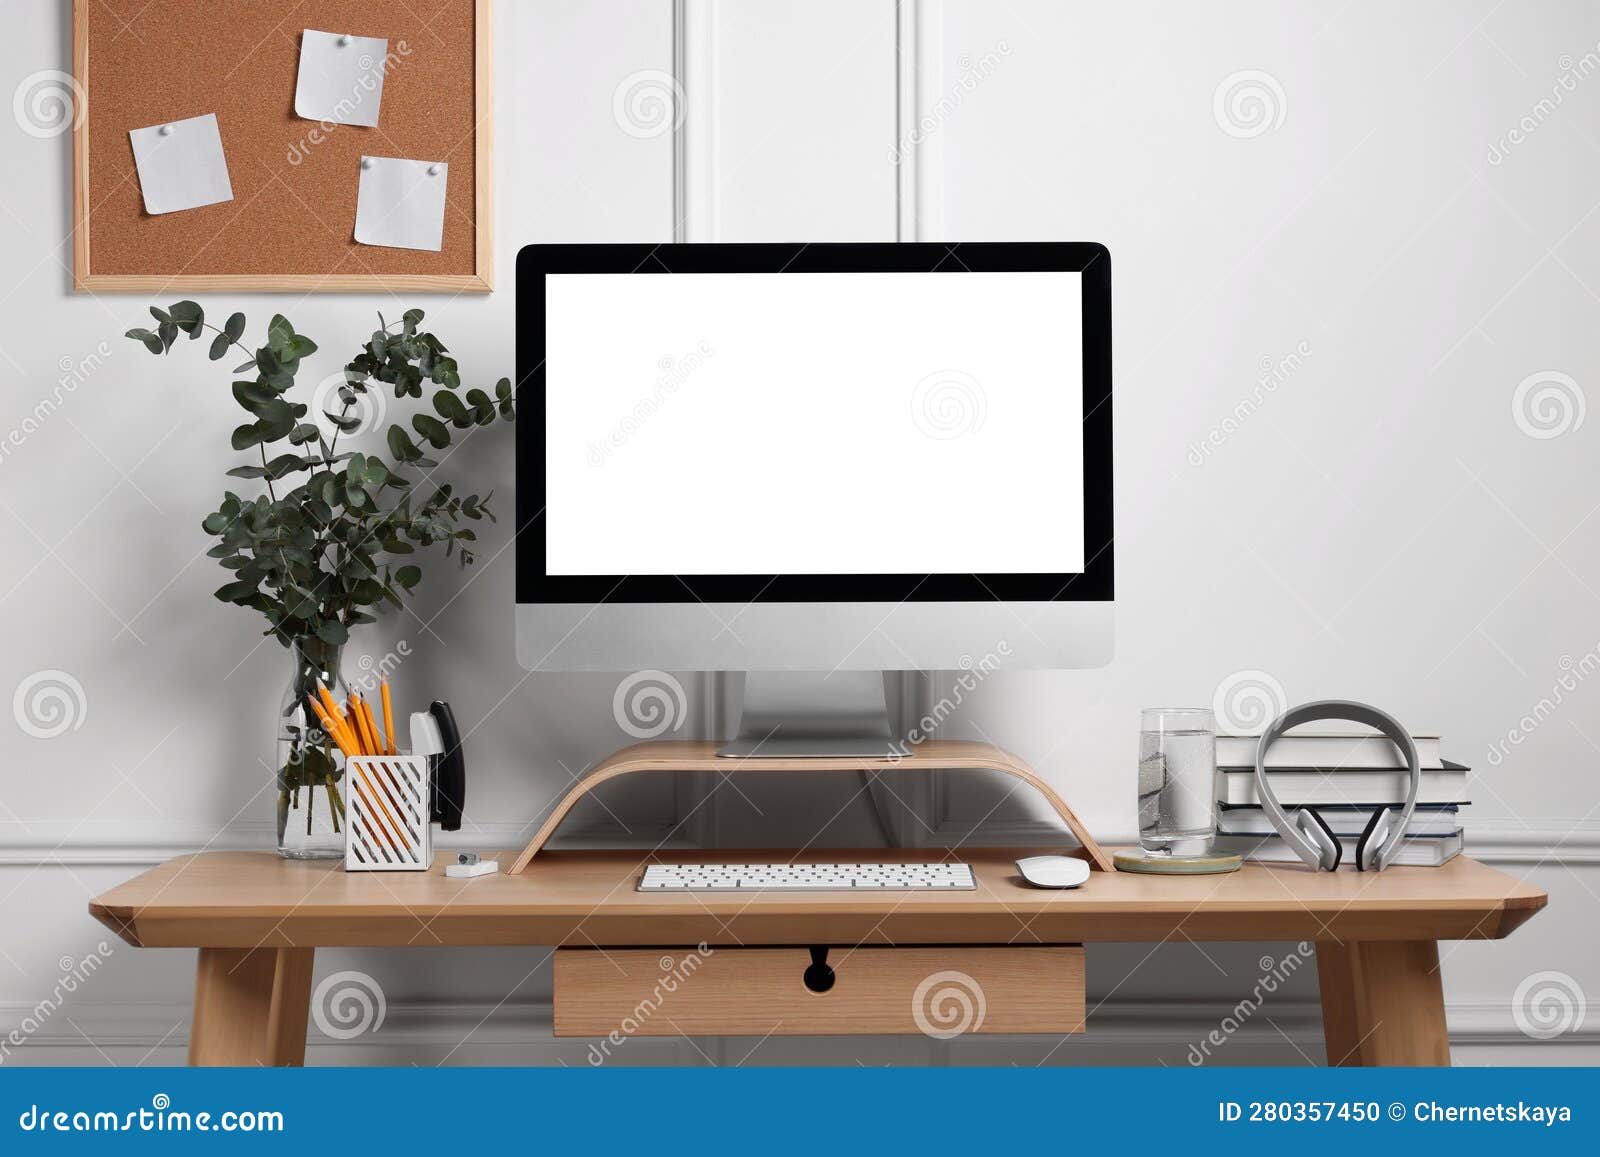  A desk with a computer, headphones, books, a glass of water, a vase with plants, a corkboard, and a pencil holder.